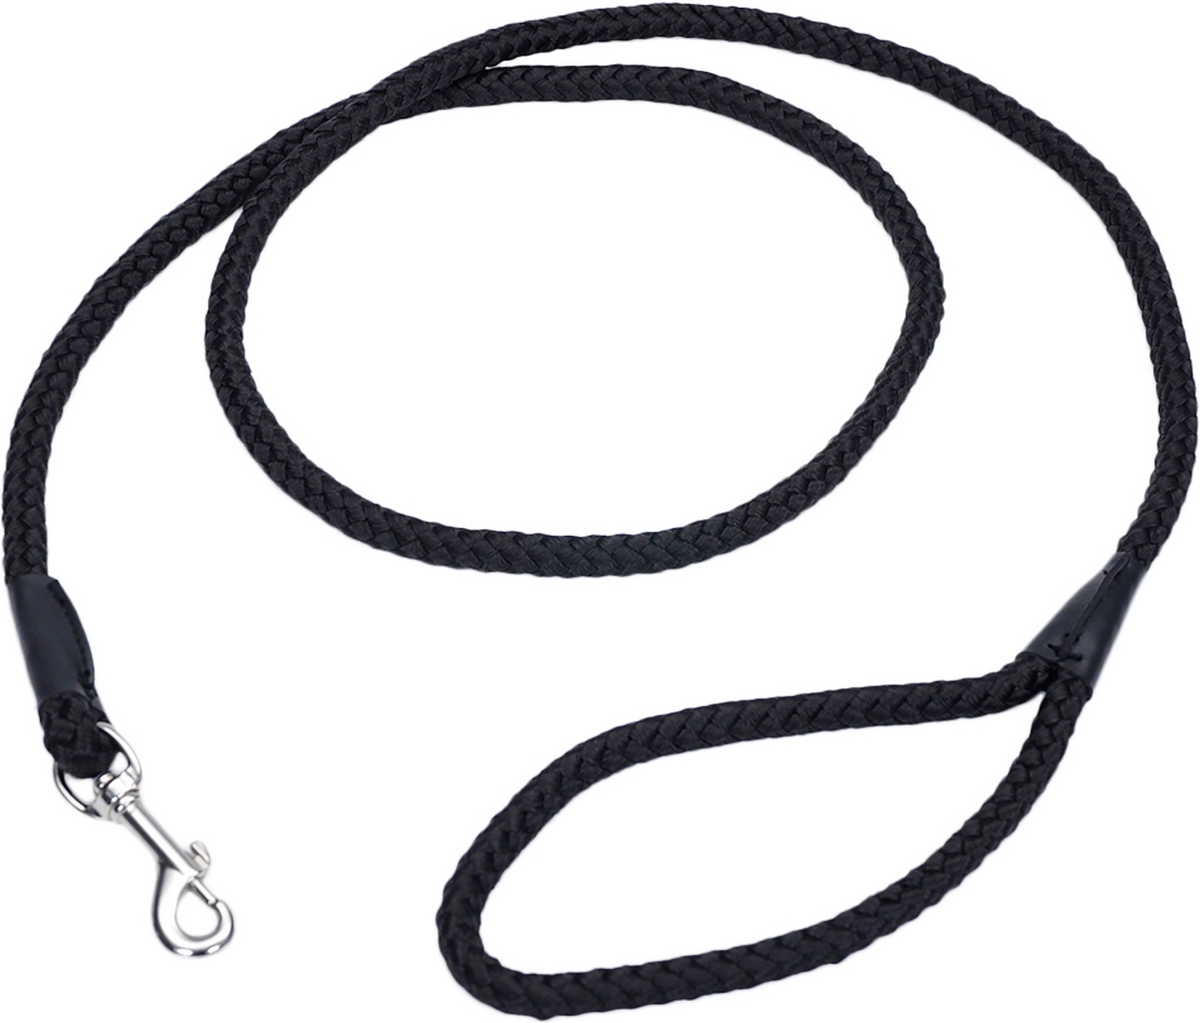 Picture of Coastal Pet Products 00206-BLK06 Black Rope Dog Leash